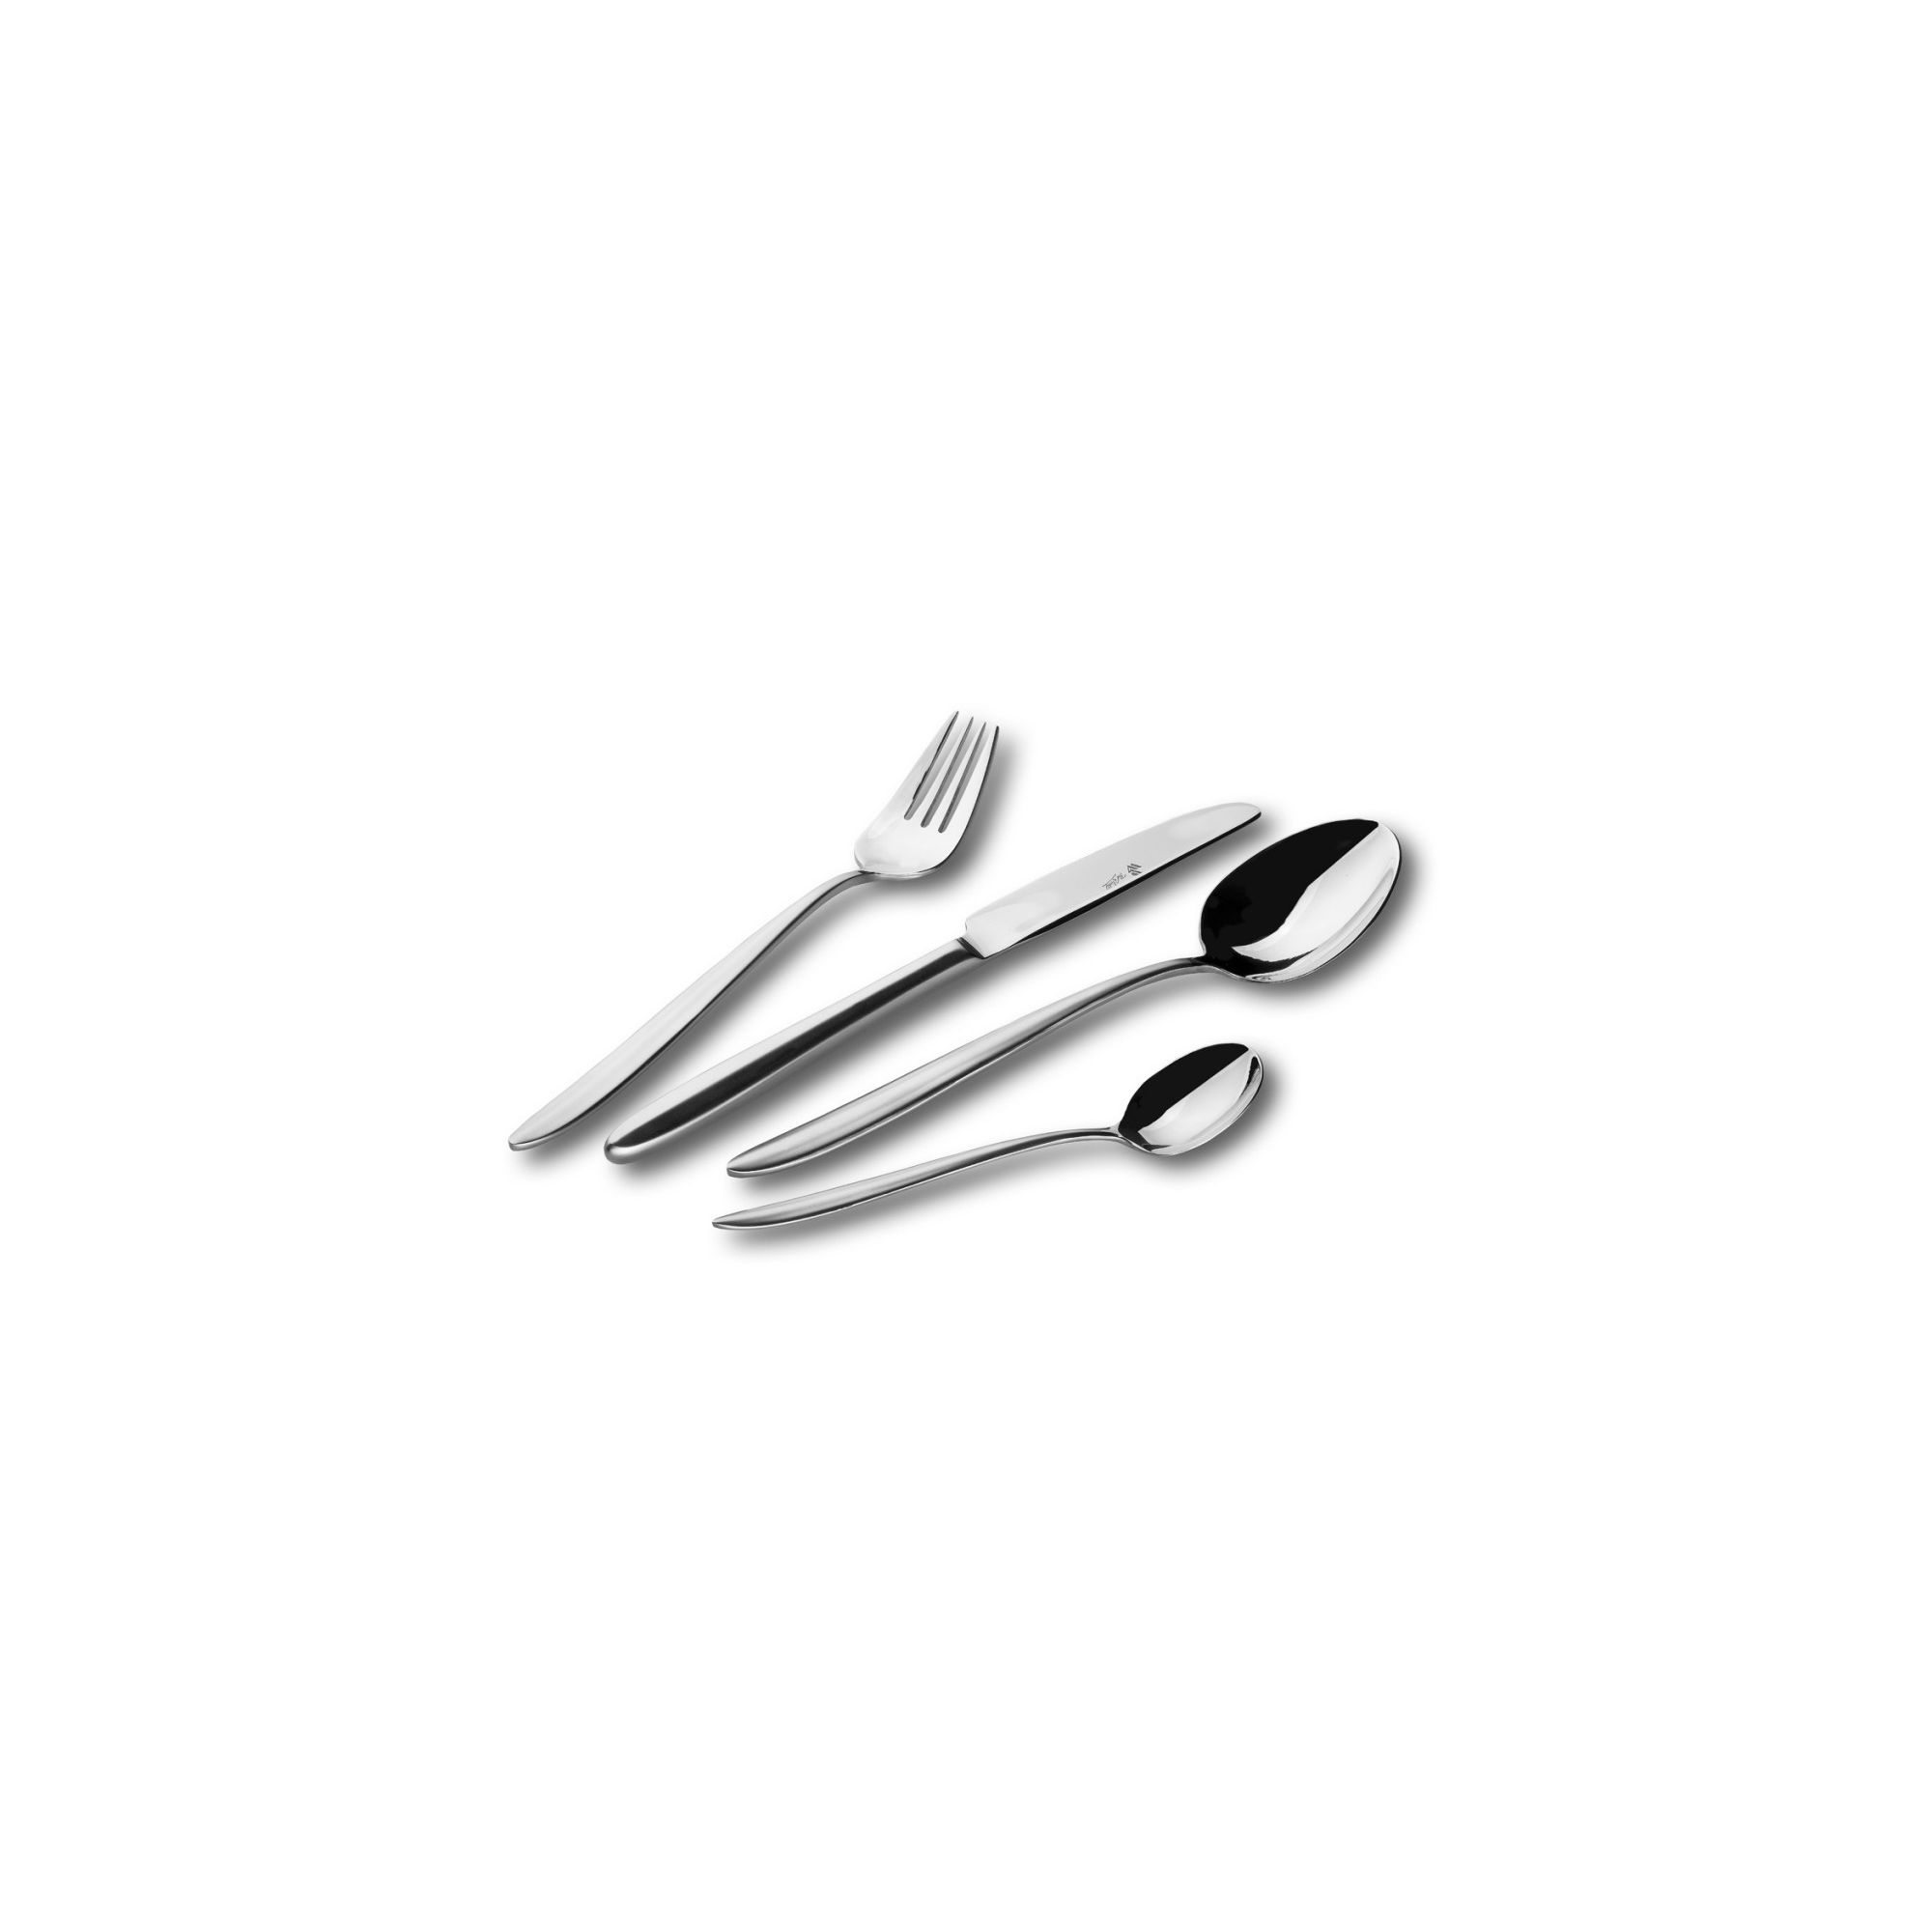 Paul Wirths Roma 58 Piece Cutlery Canteen Set in Satin at Tesco Direct